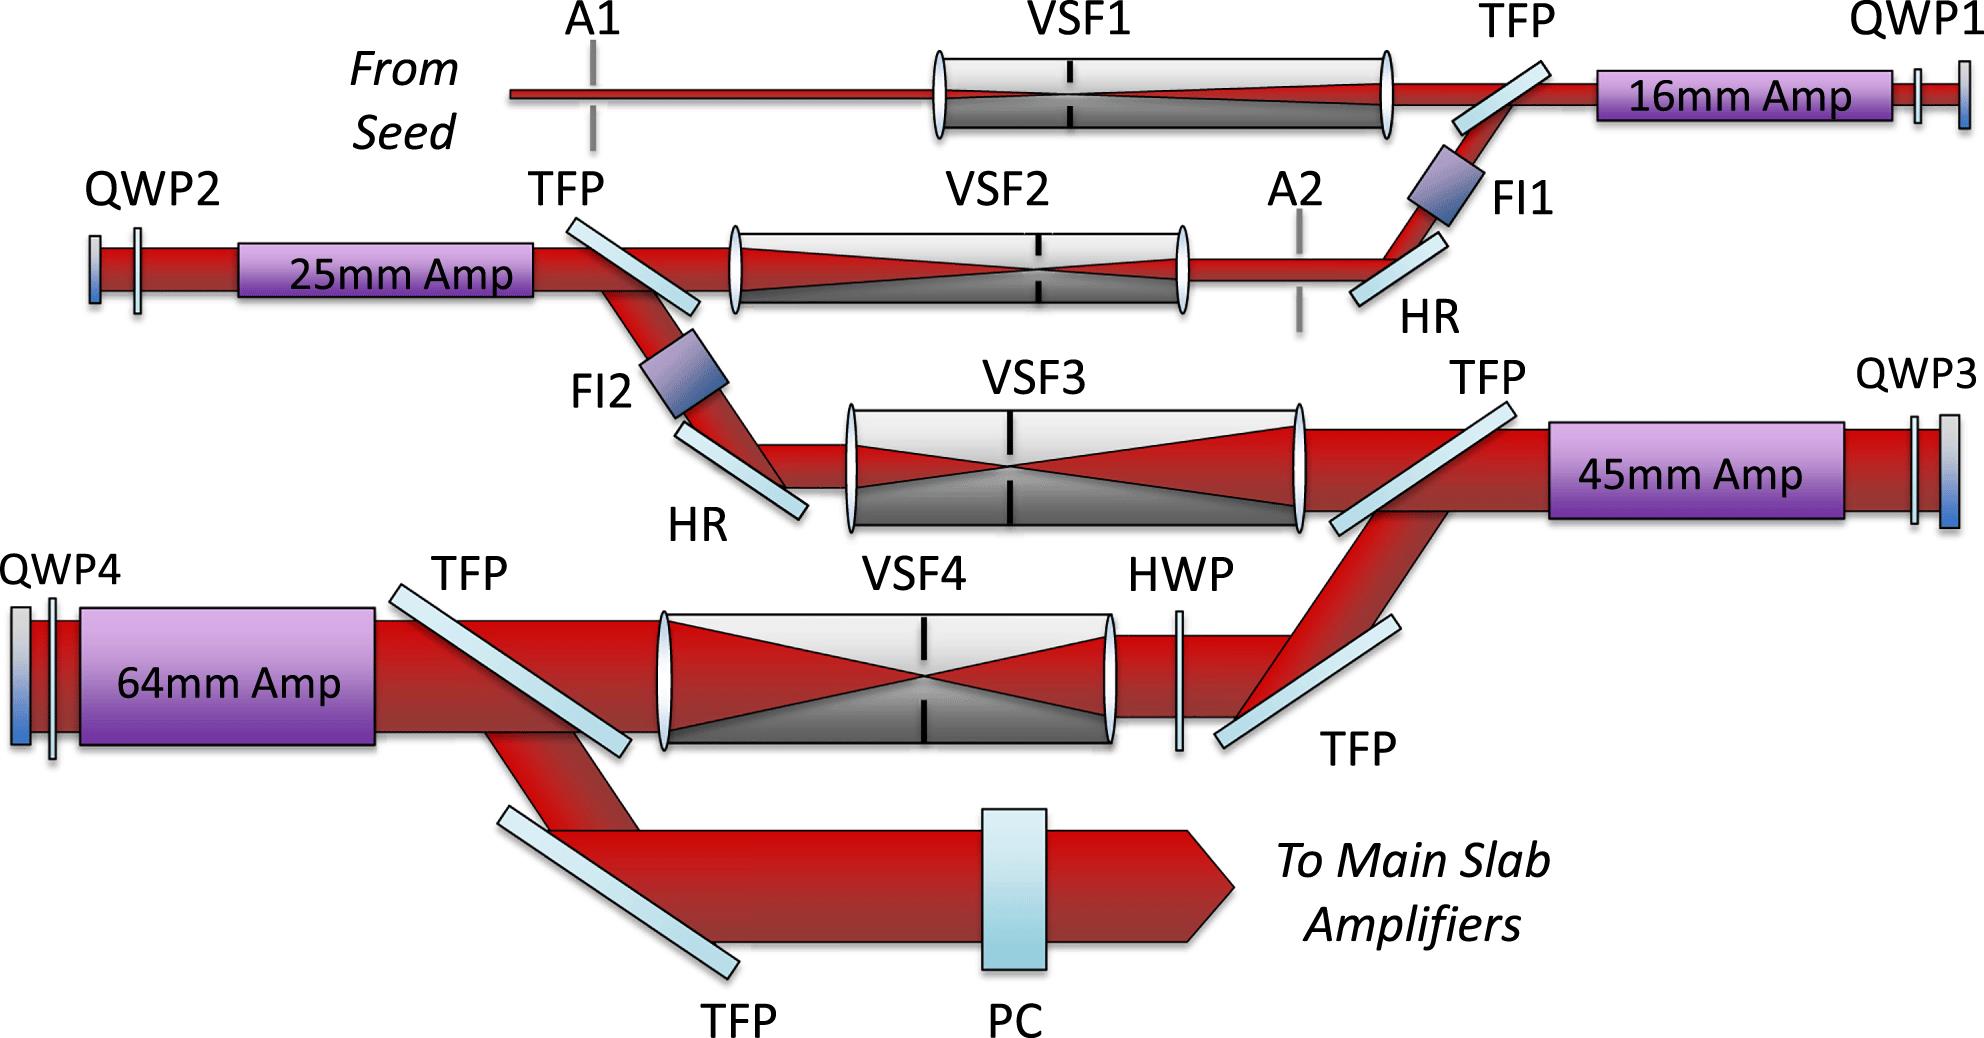 Notional rod amplifier layout. A1 and A2 are apodizer and gain filter planes. VSF1, VSF2, VSF3 and VSF4 are vacuum spatial filters with 2.5x, 2x, 1.875x and 1.4x magnification respectively. TFPs are thin film polarizers. HRs are high reflector mirrors. QWP1, QWP2, QWP3 and QWP4 are zero-order quarter-wave plates while HWP is a zero-order half-wave plate. FI1 and FI2 are 12 mm and 25 mm Faraday isolators (which include a half-wave plate). PC is the final 75 mm clear aperture Pockels cell. Apodizer A2 defines an object plane for relay imaging, with image planes at the entrance to FI2 and the entrance to VSF4.